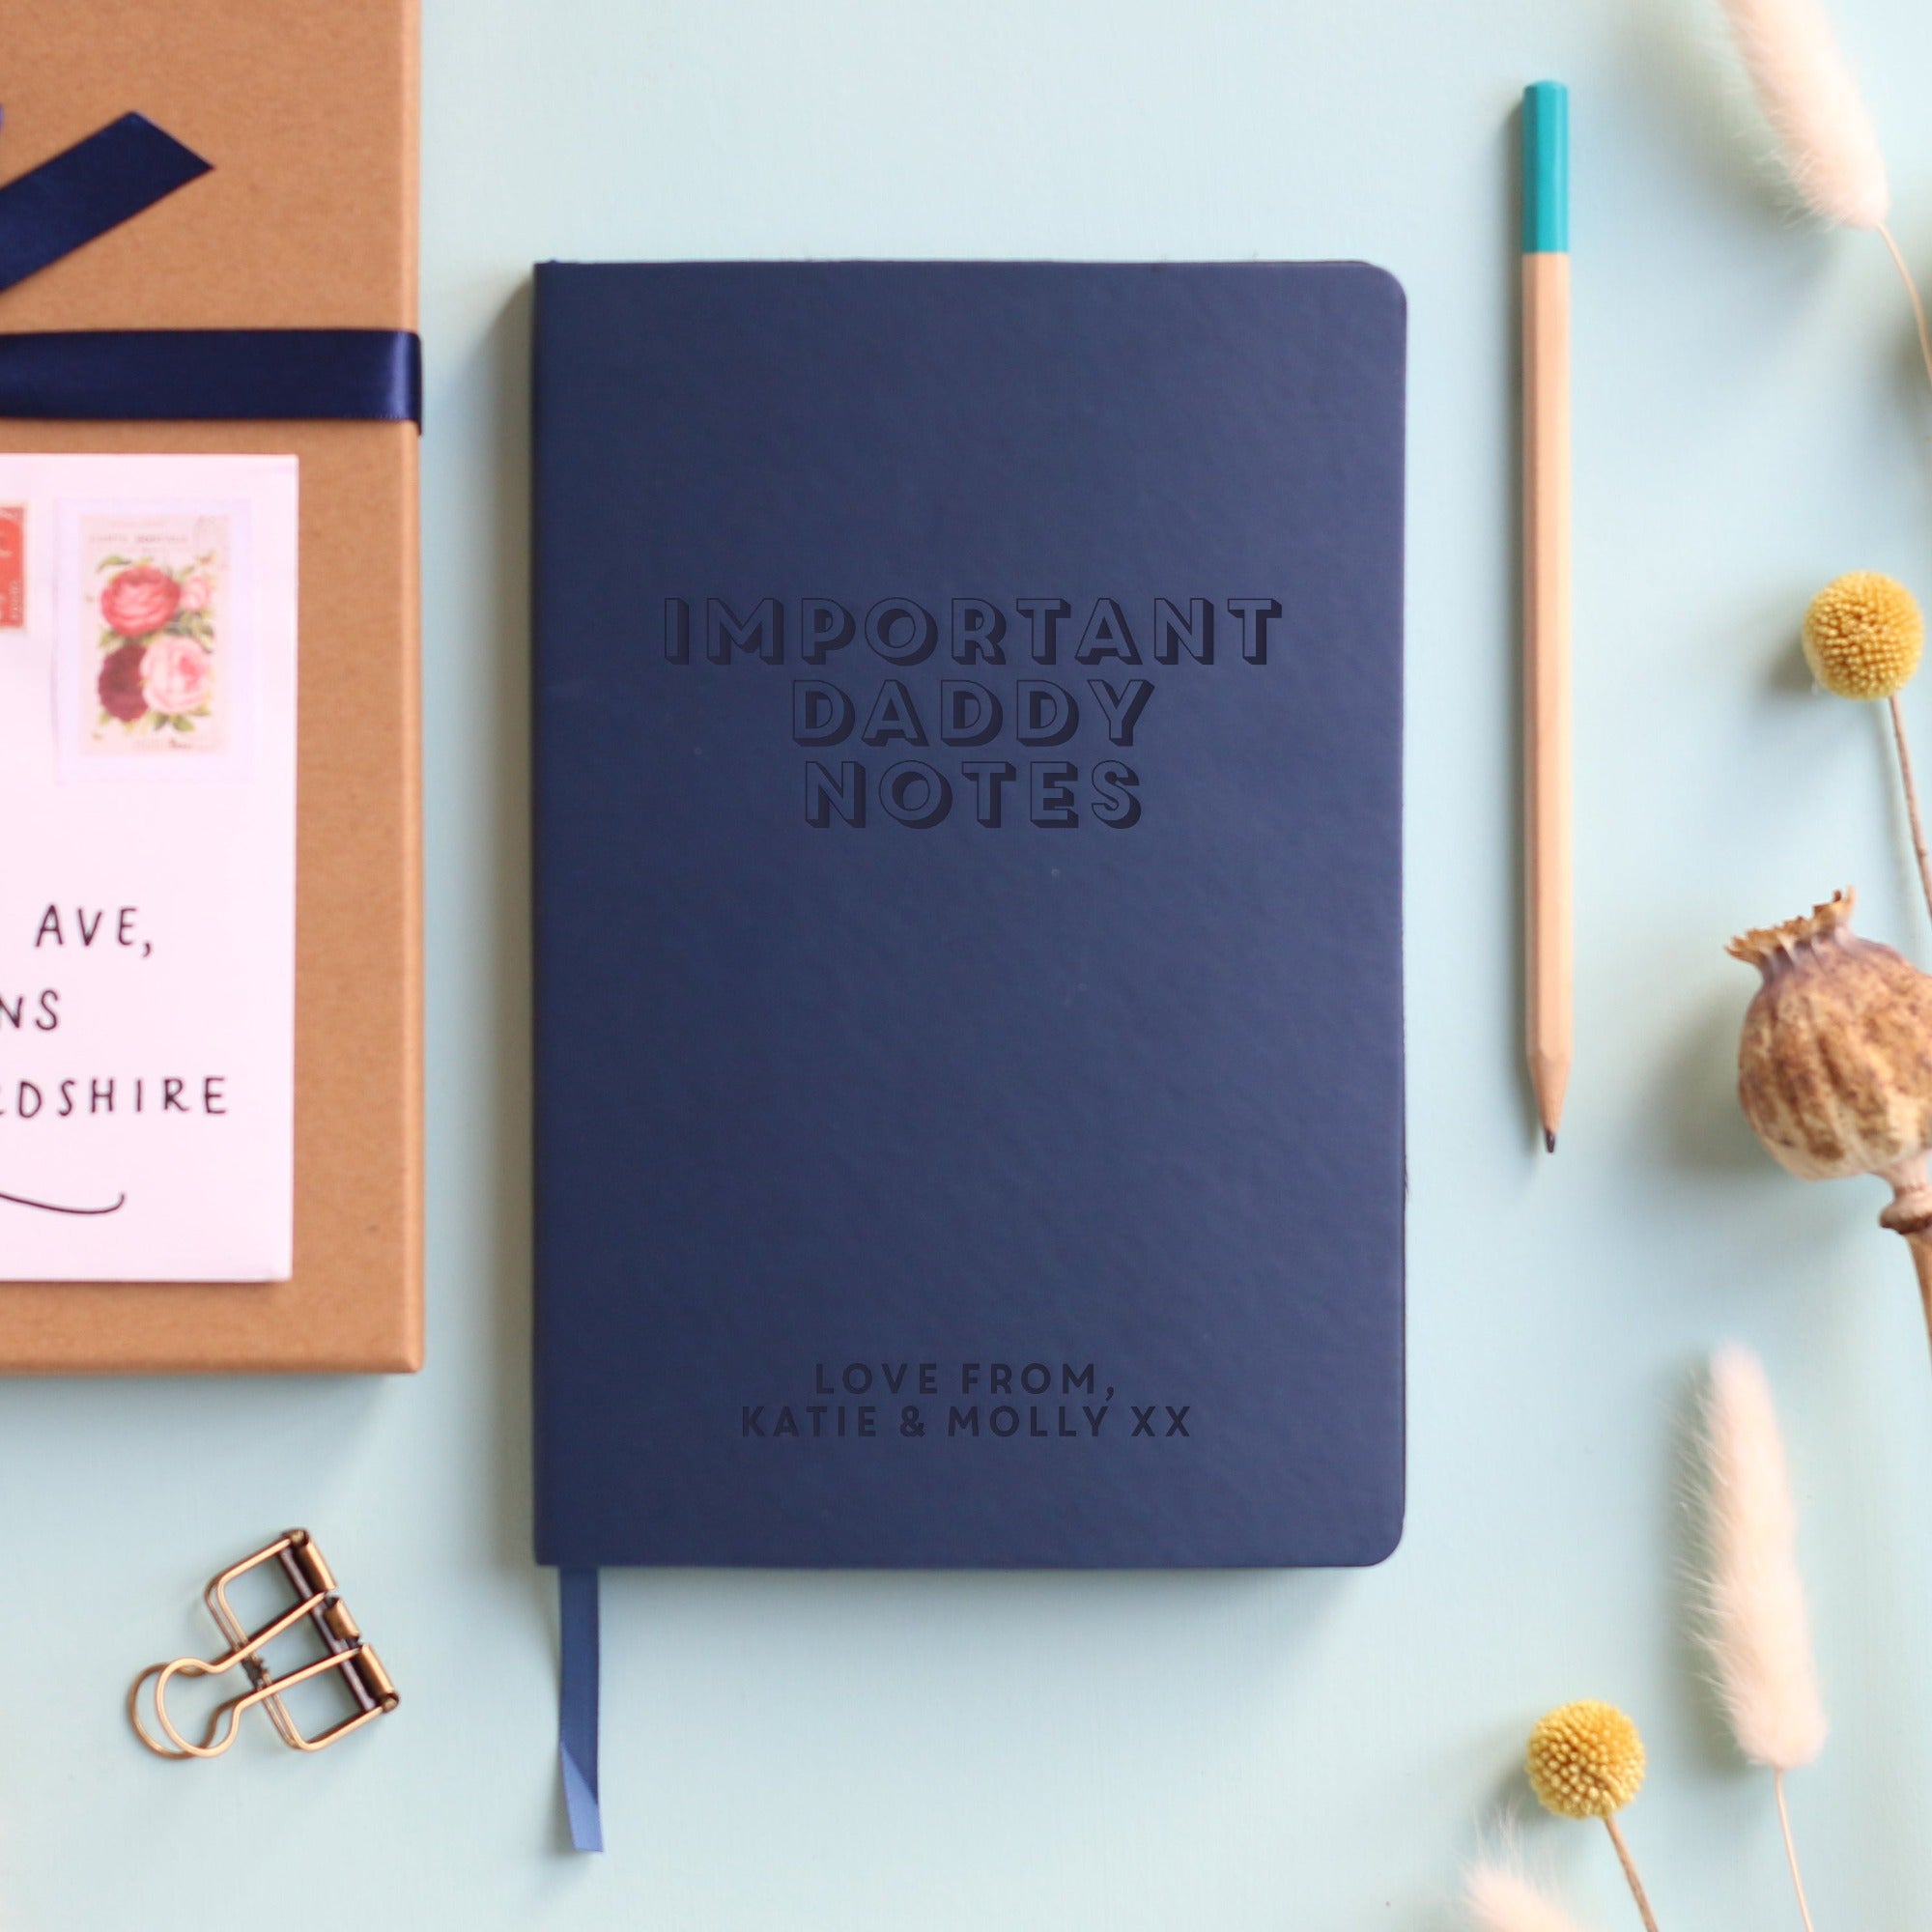 Navy notebook engraved with the text "IMPORTANT DADDY NOTES"